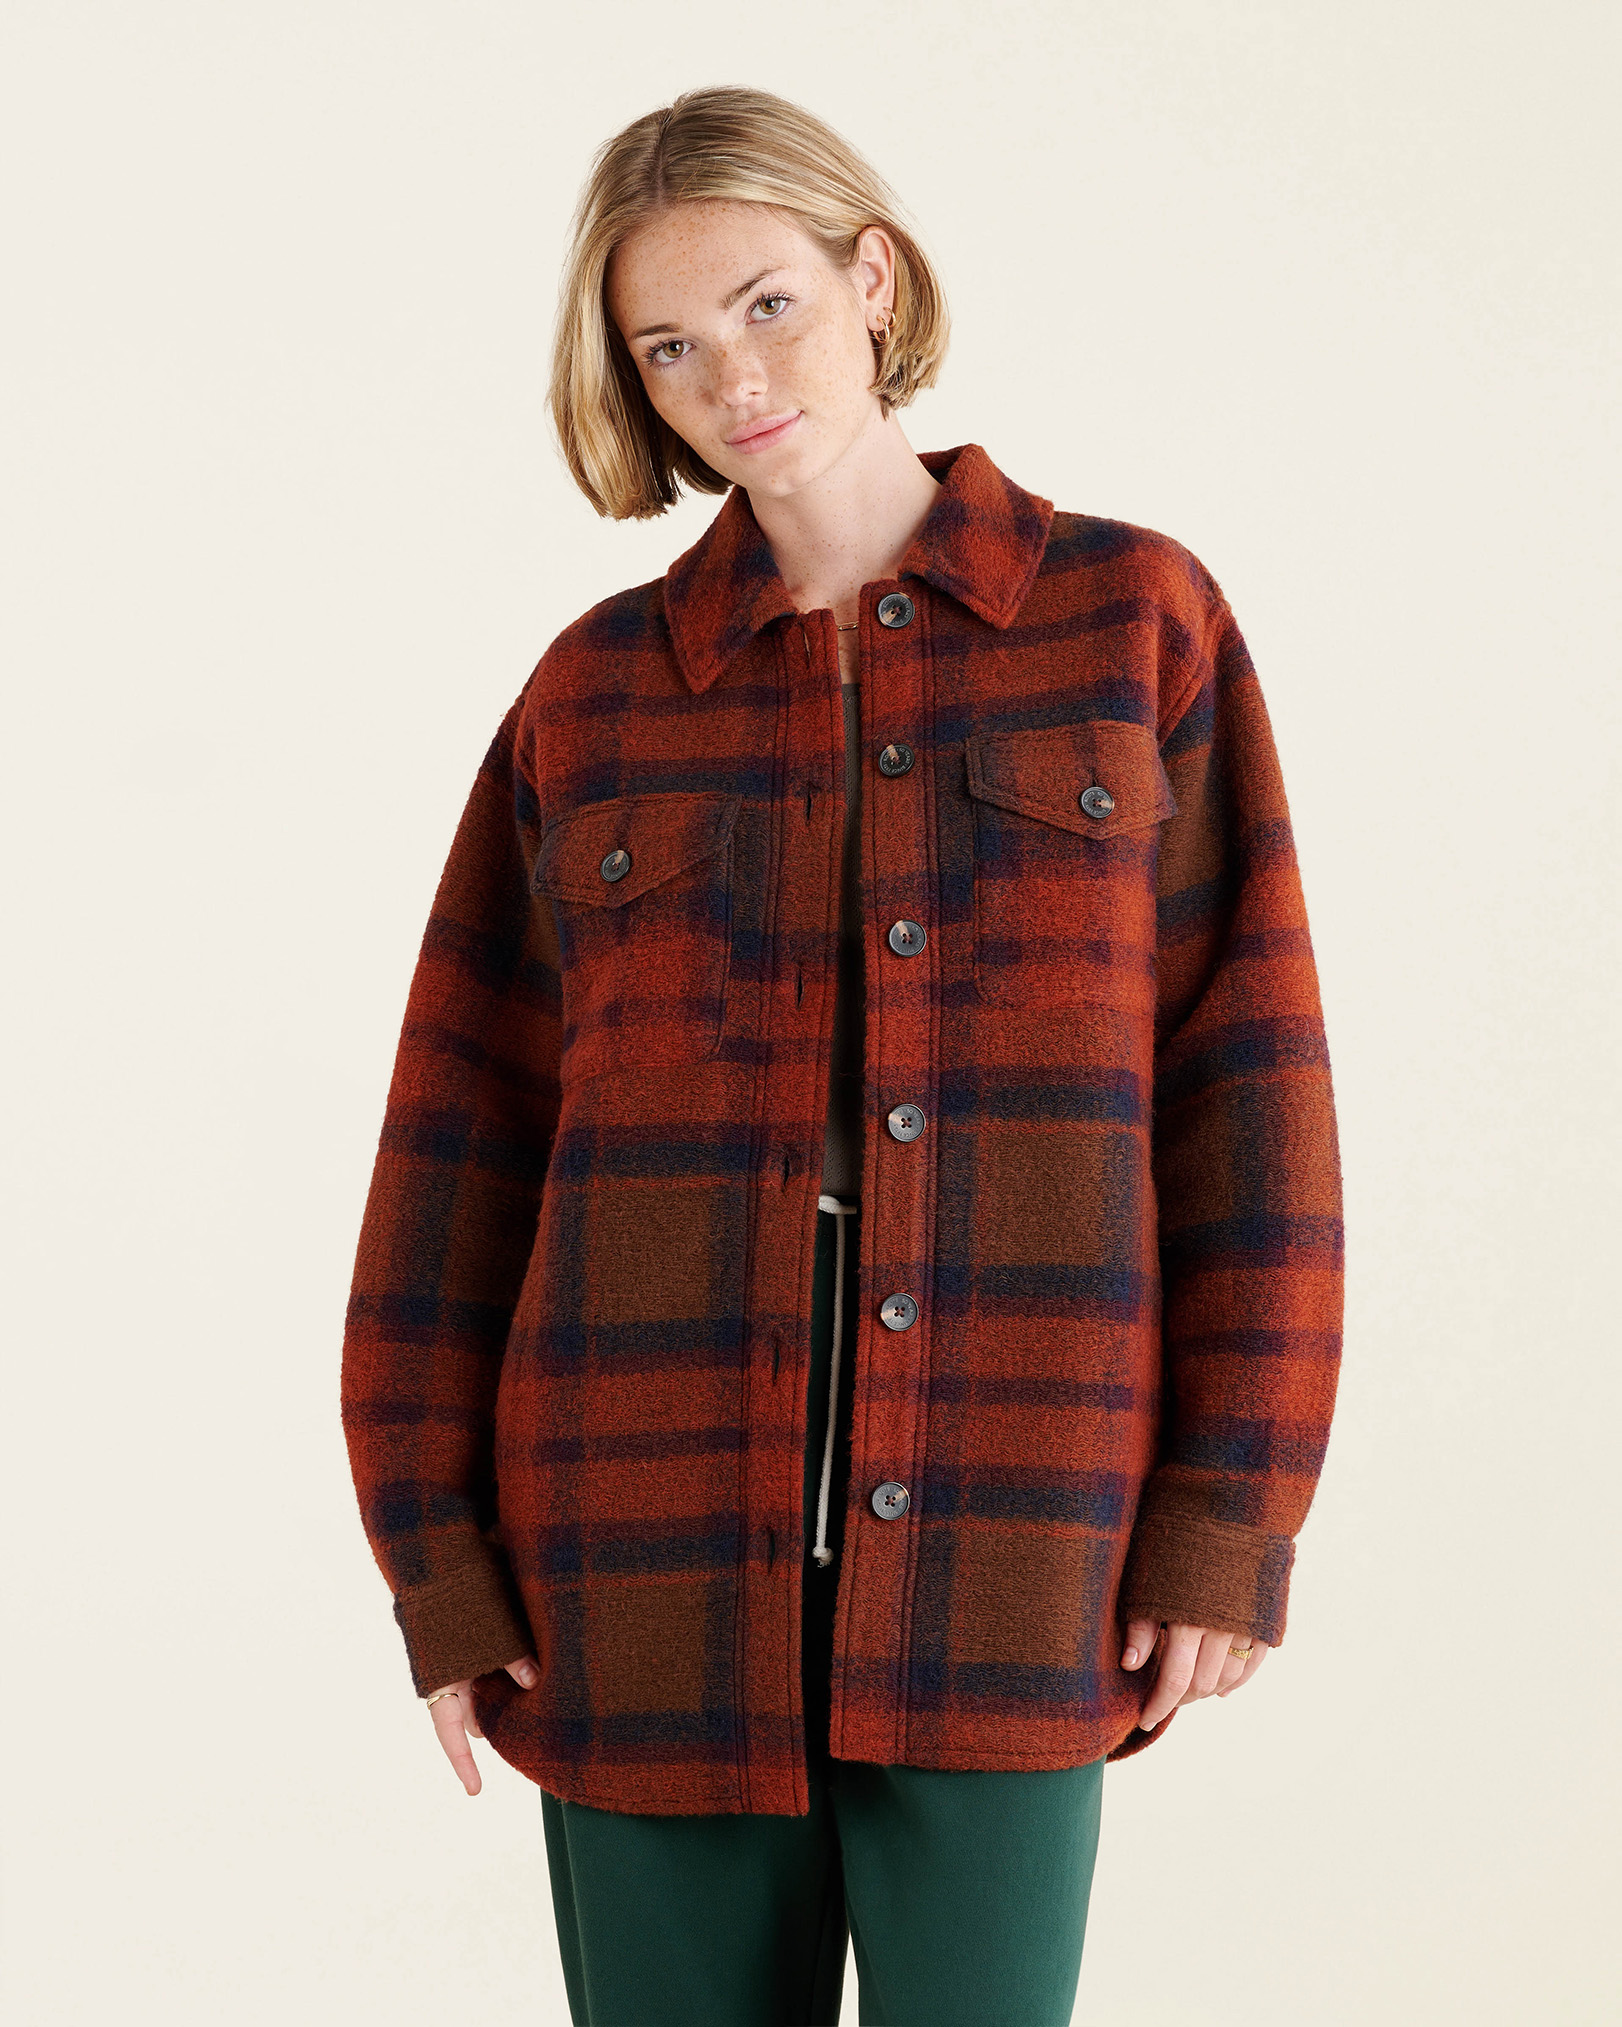 Roots Seymour Shacket Jacket in Seymour Rust Plaid